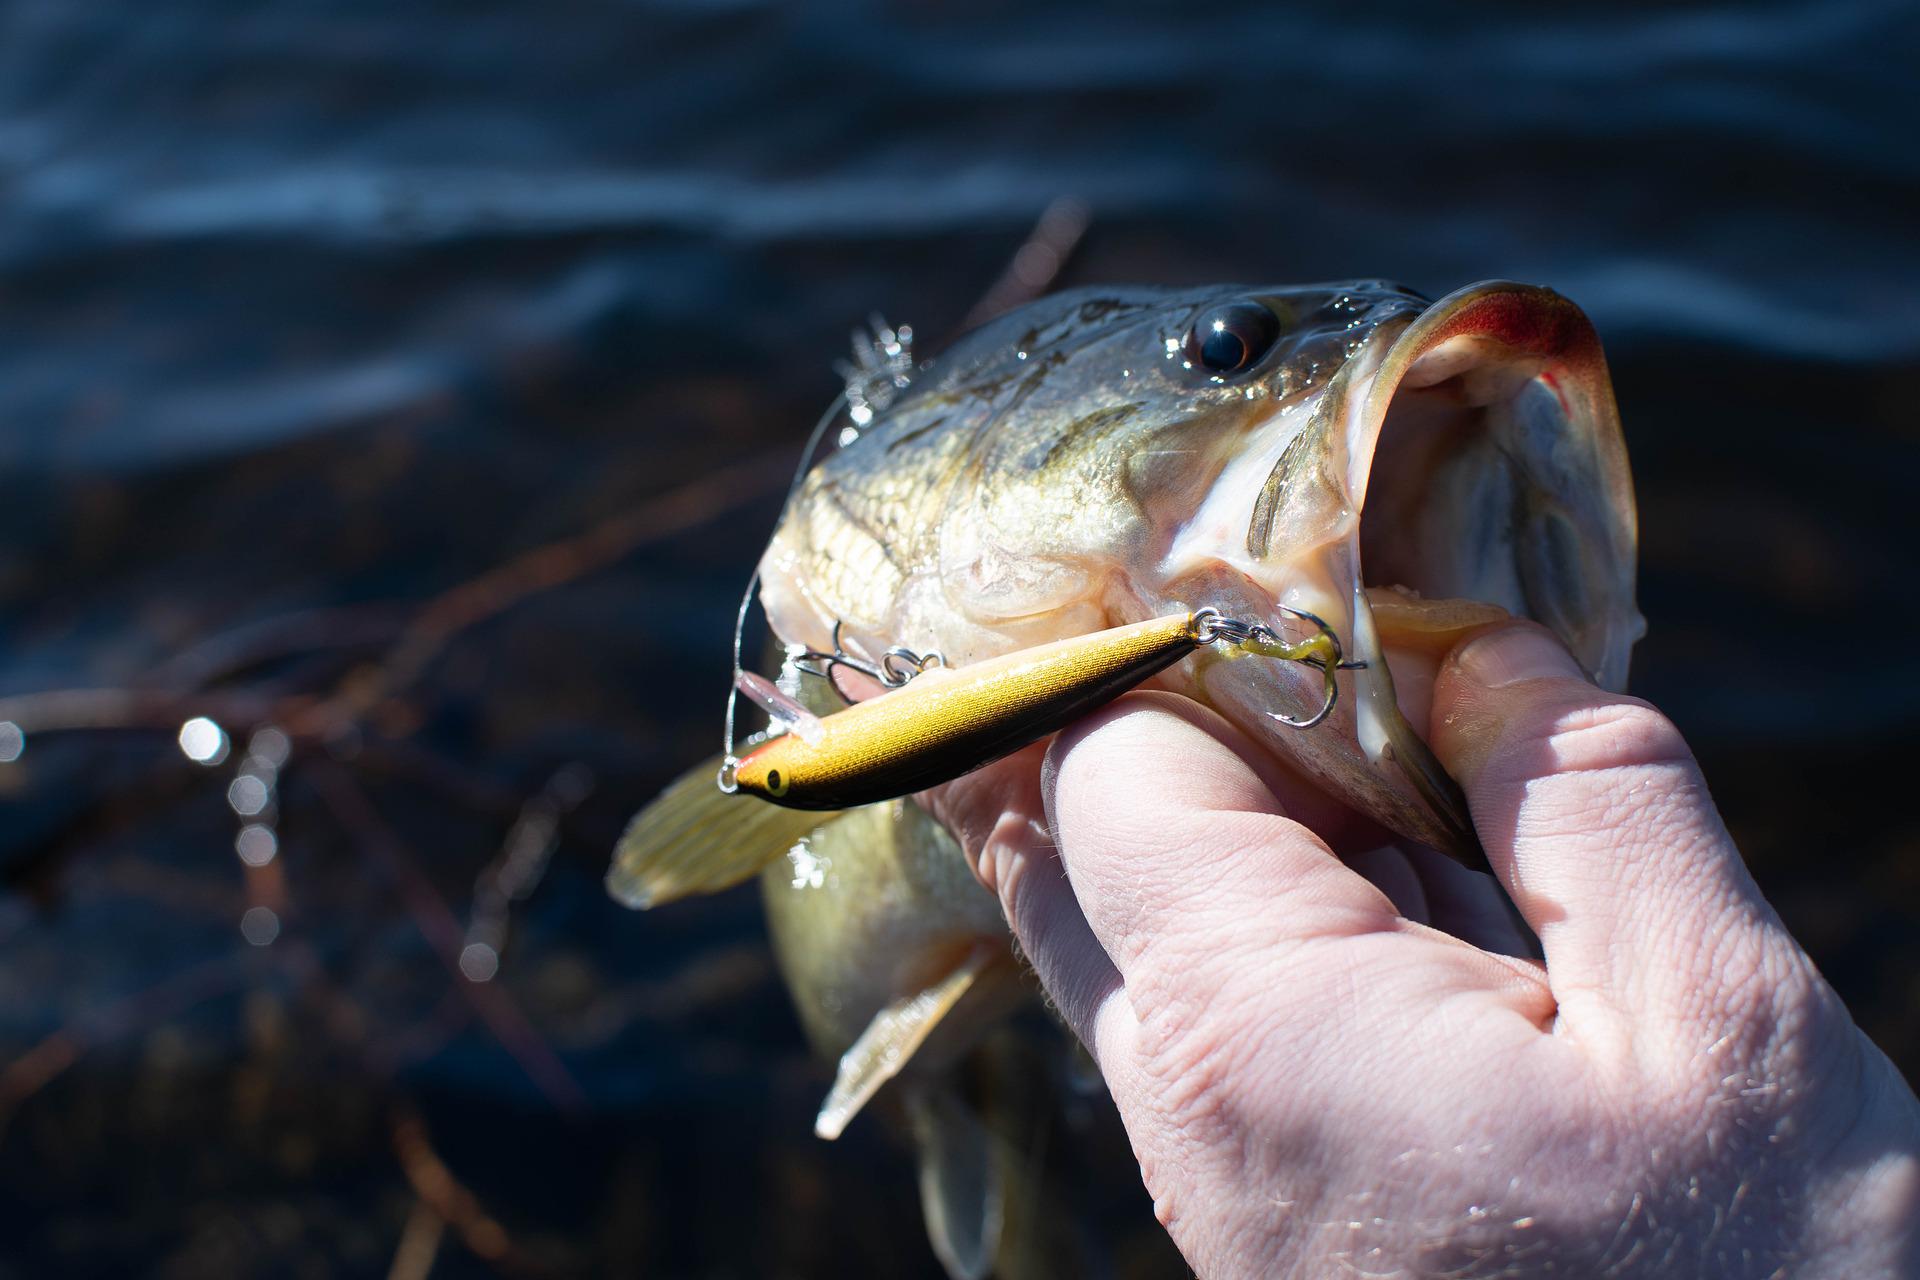 Is that fish you caught safe to eat? Check out this guide before